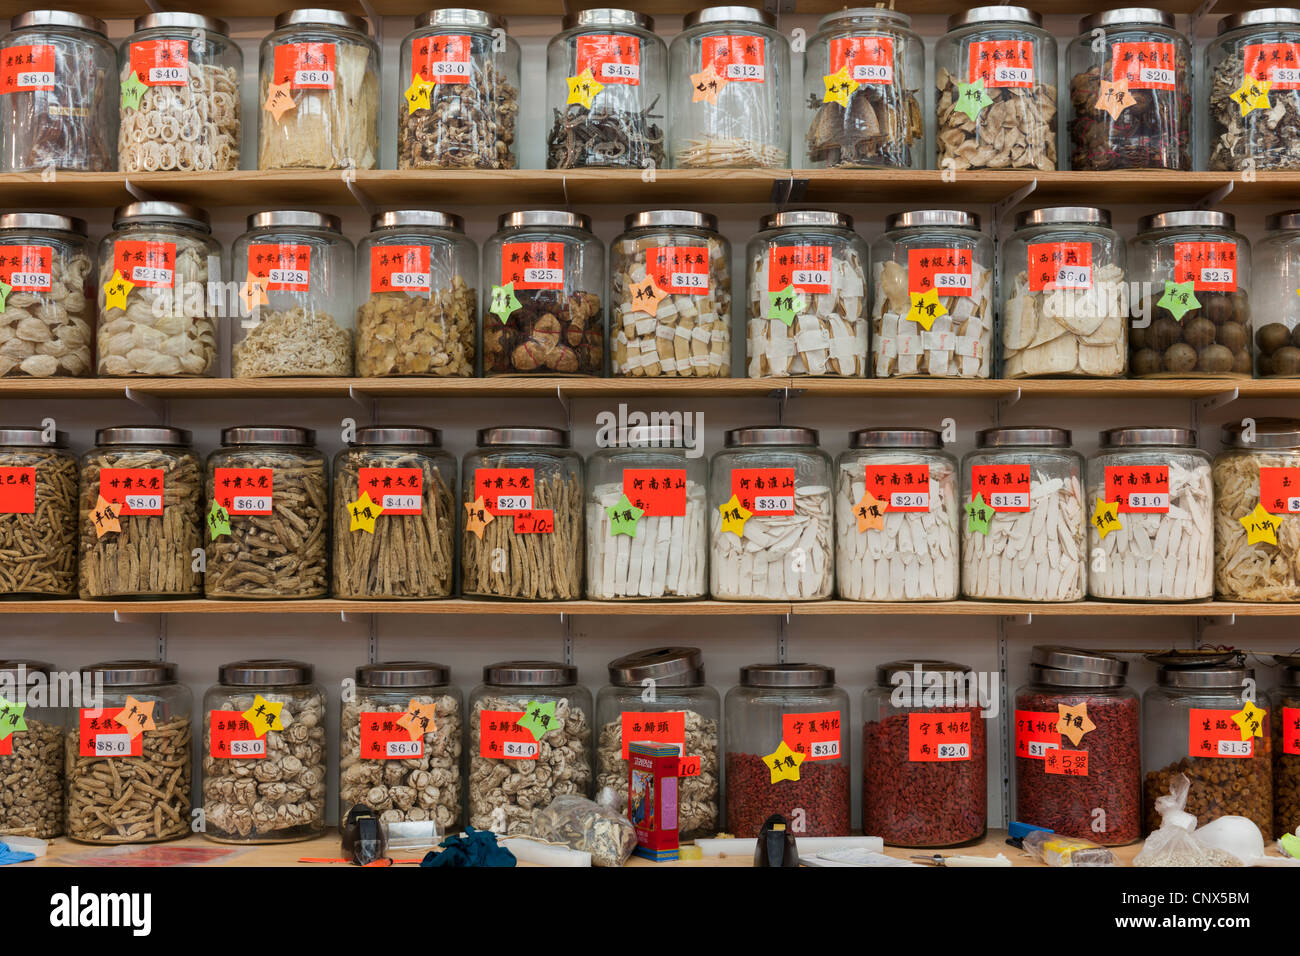 Chinese herbal medicine in glass jars on shelves Stock Photo